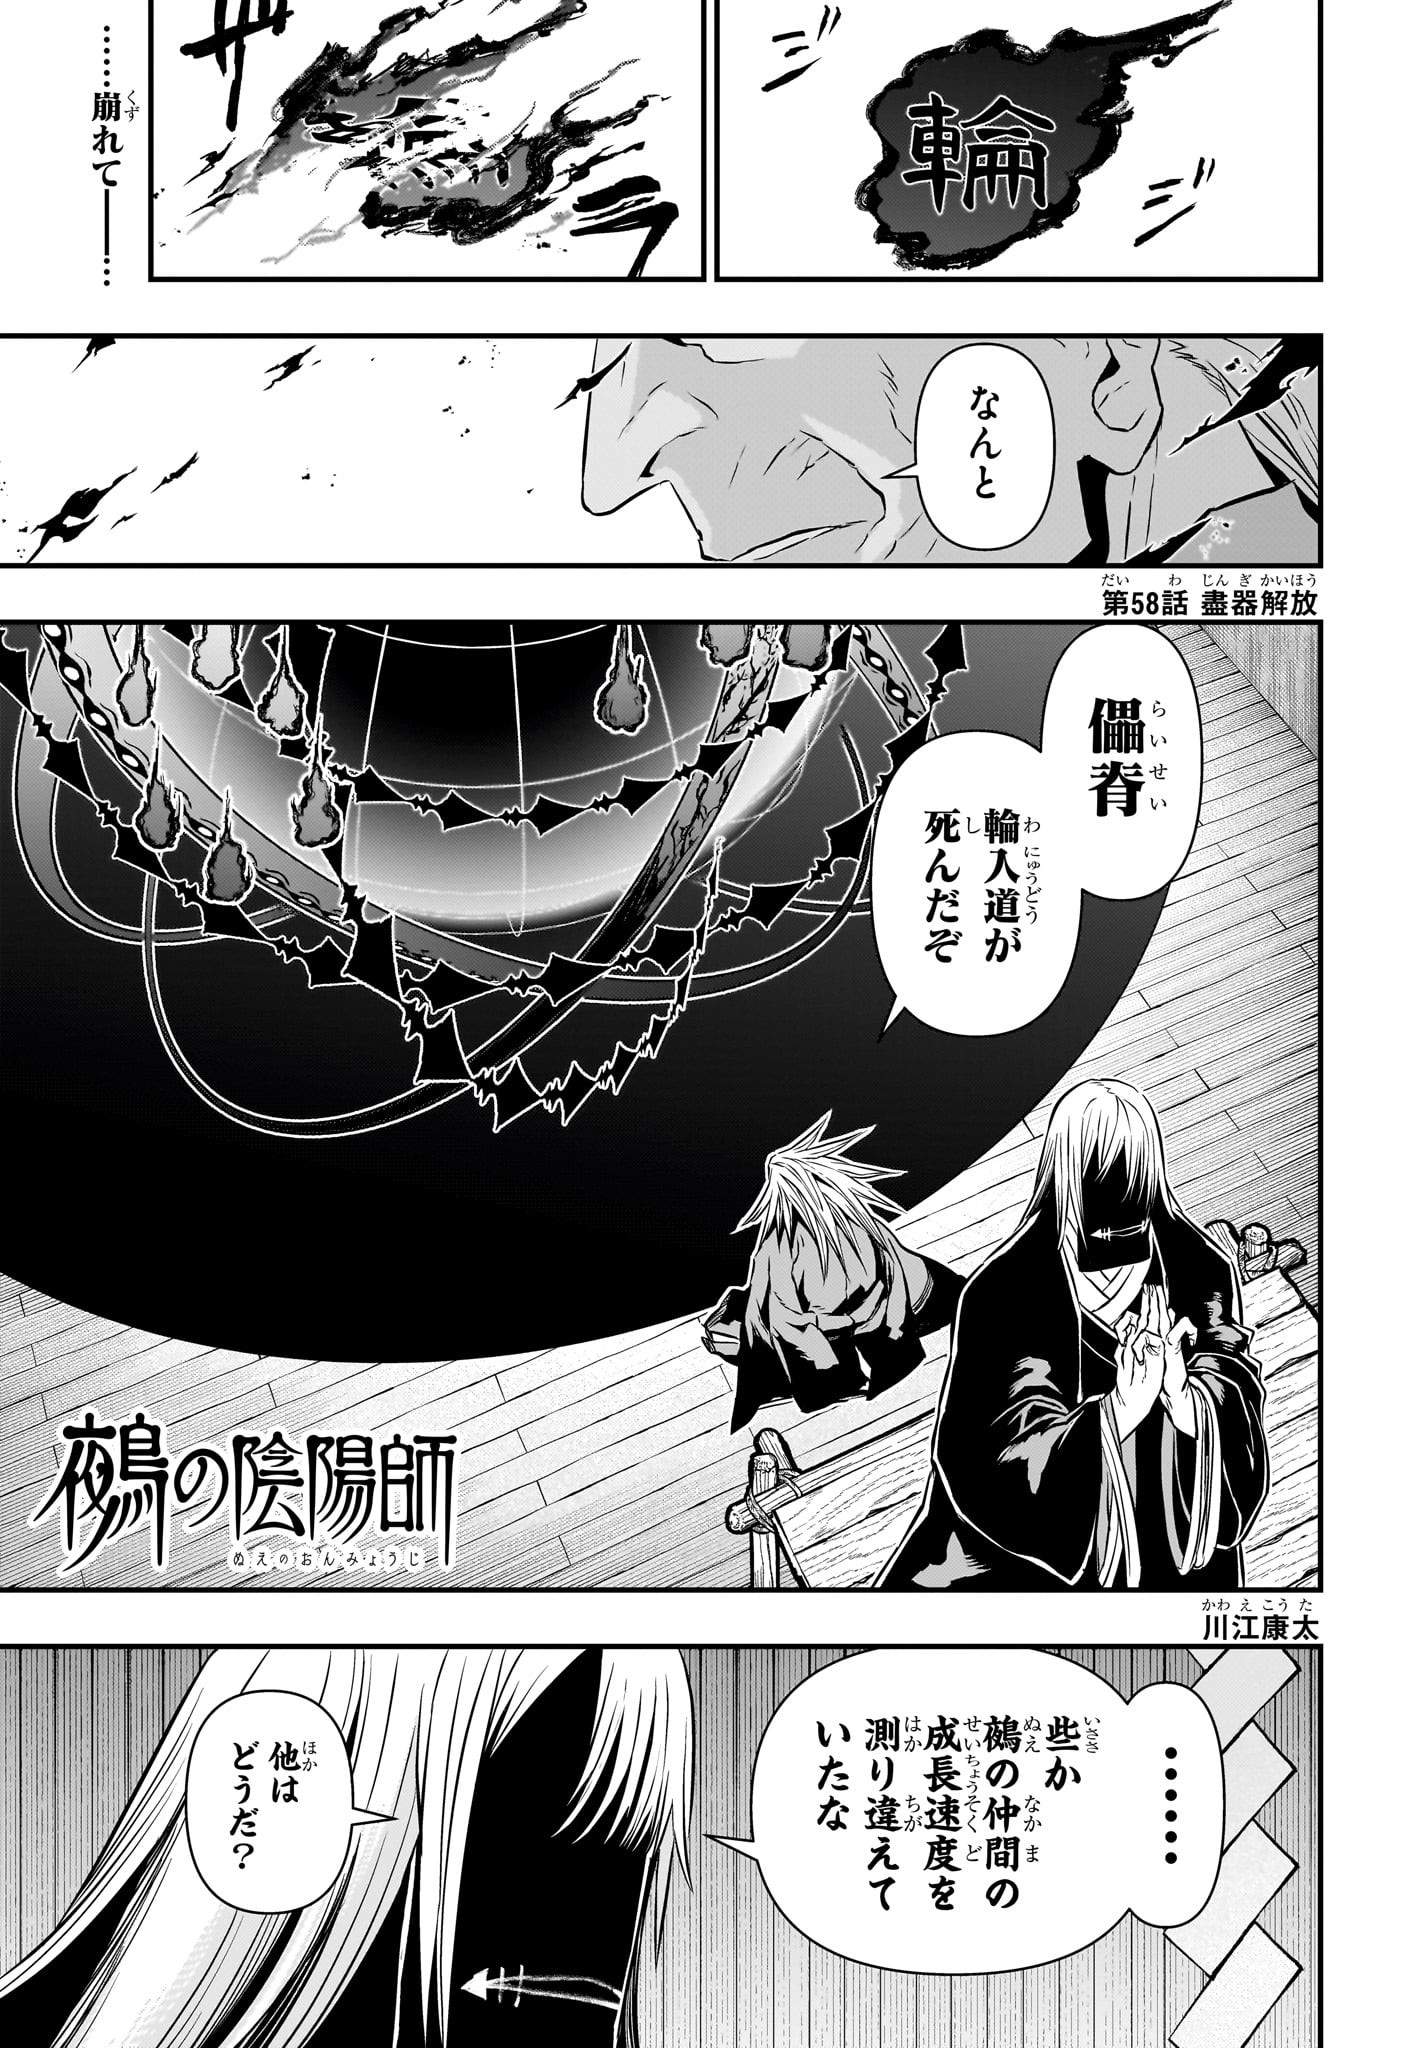 Nue no Onmyouji - Chapter 58 - Page 1